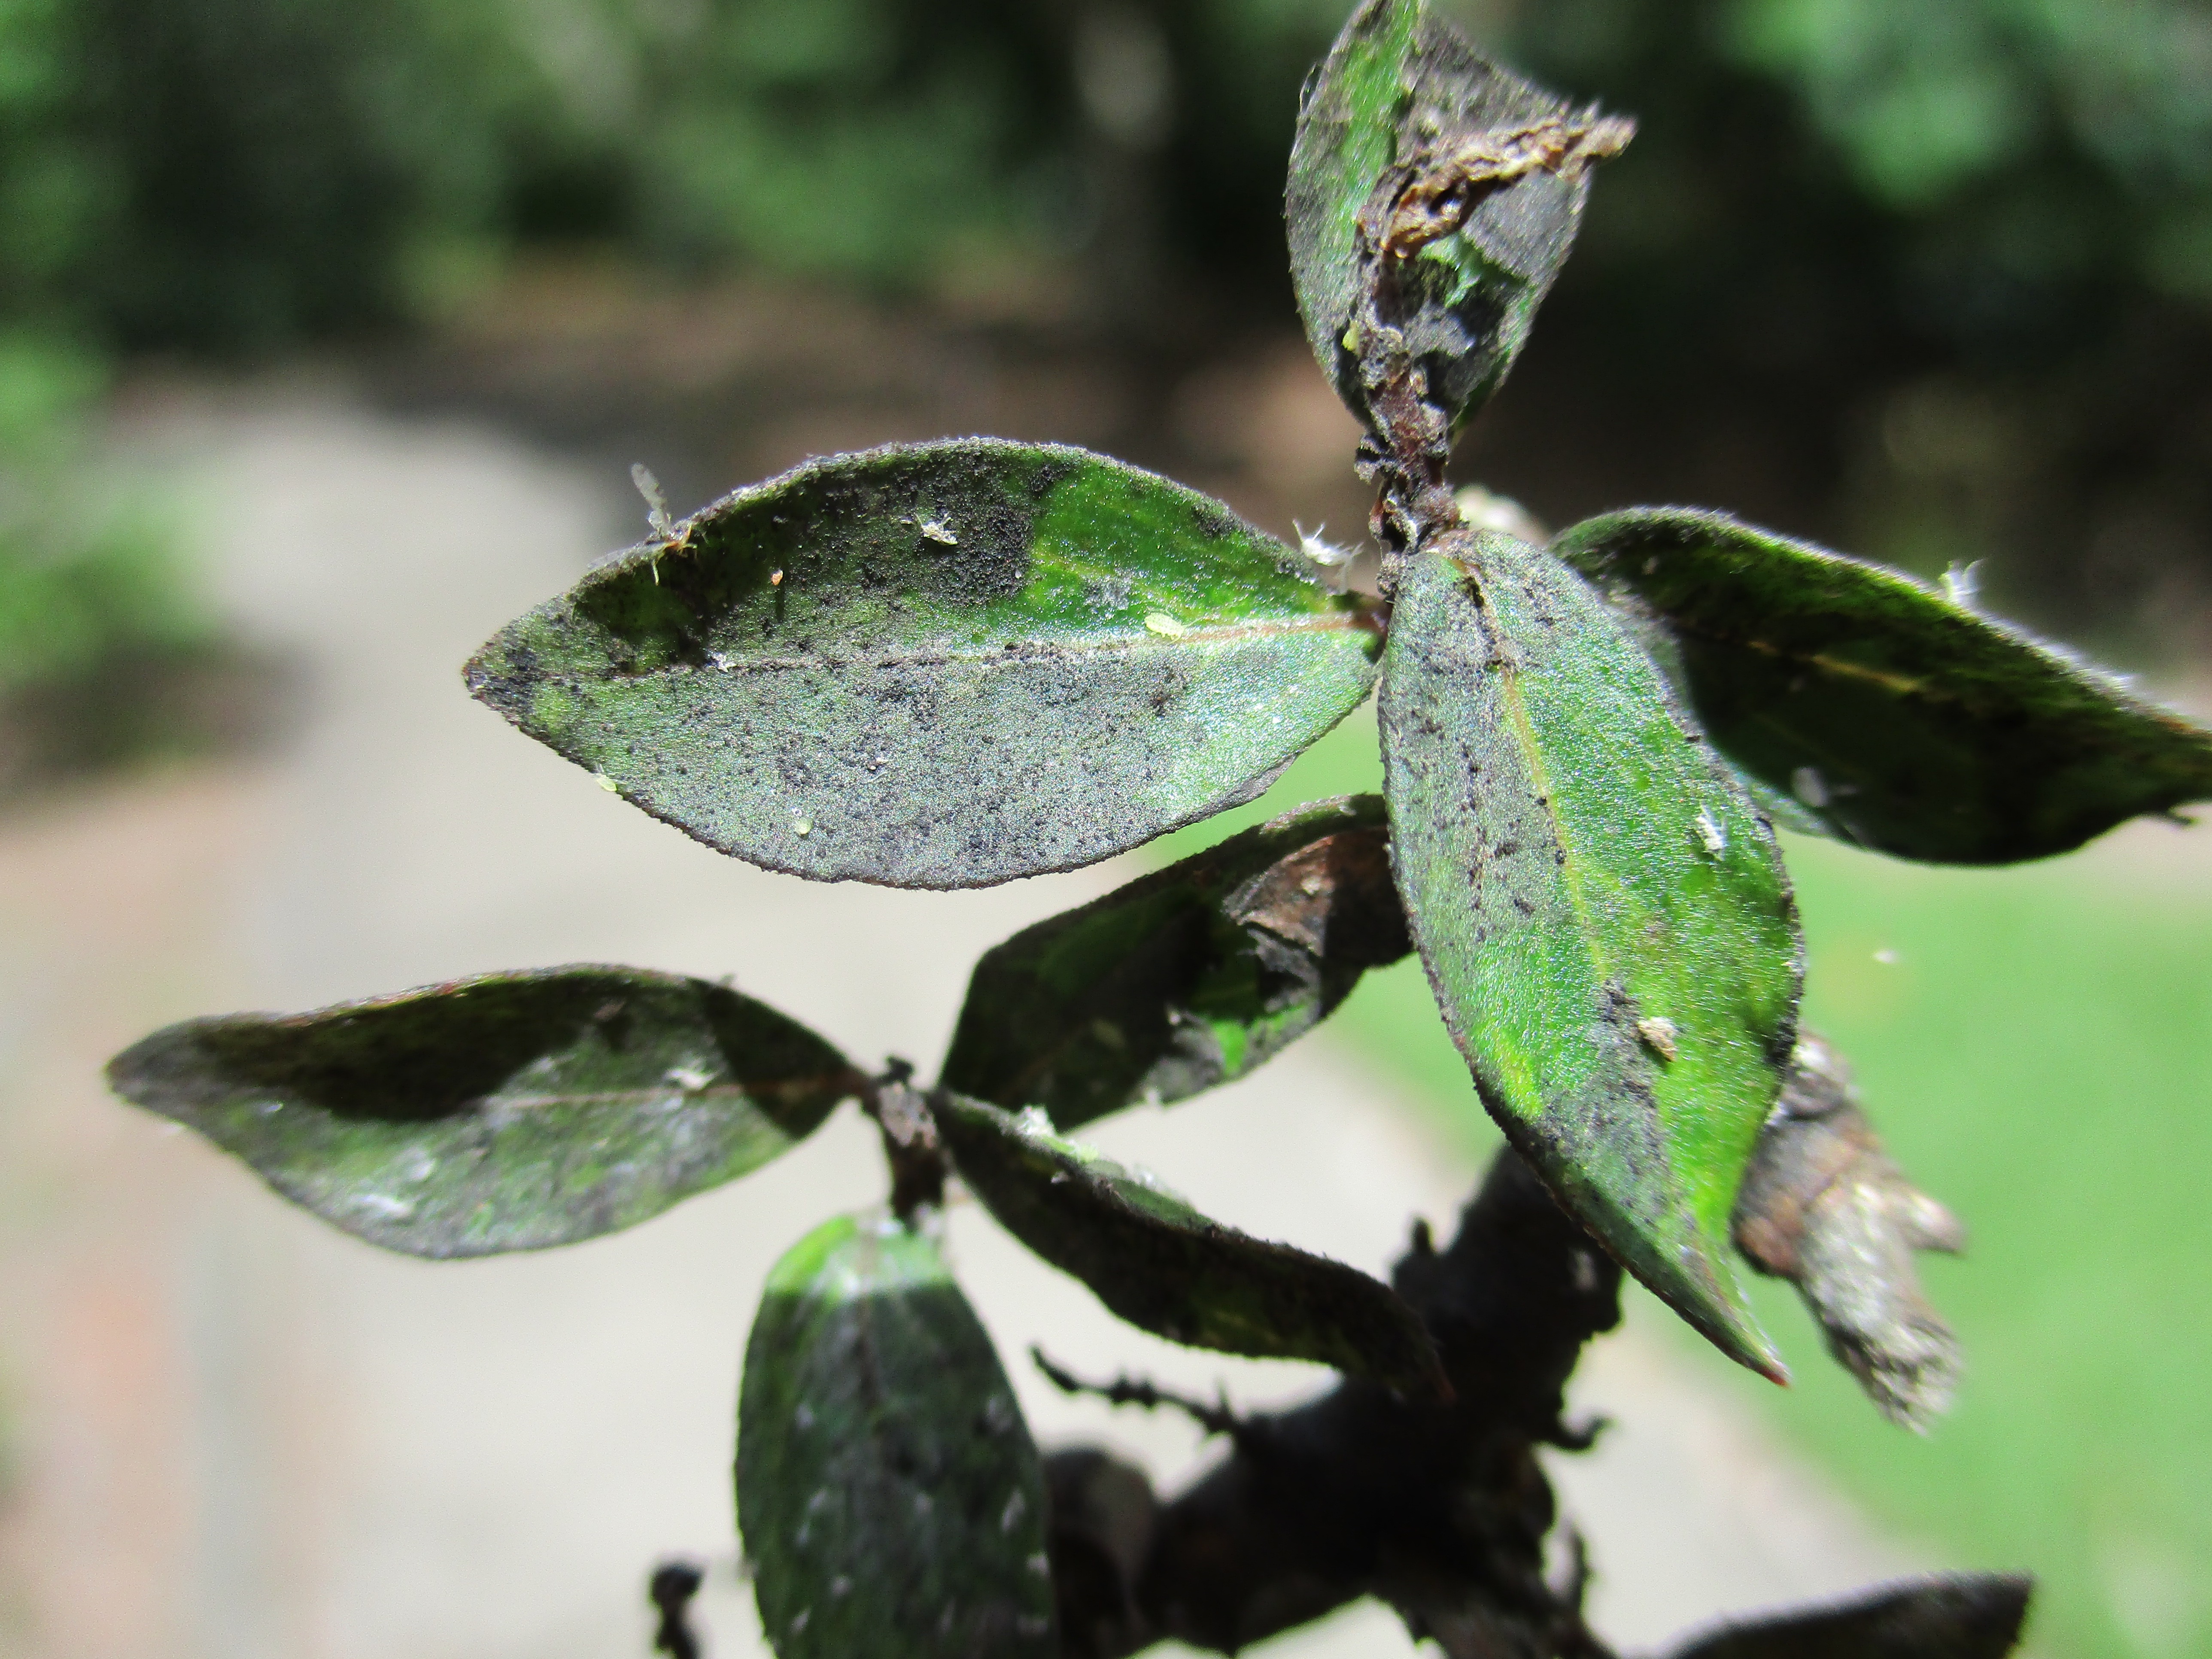 Sooty mold on the foliage of a crapemyrtle